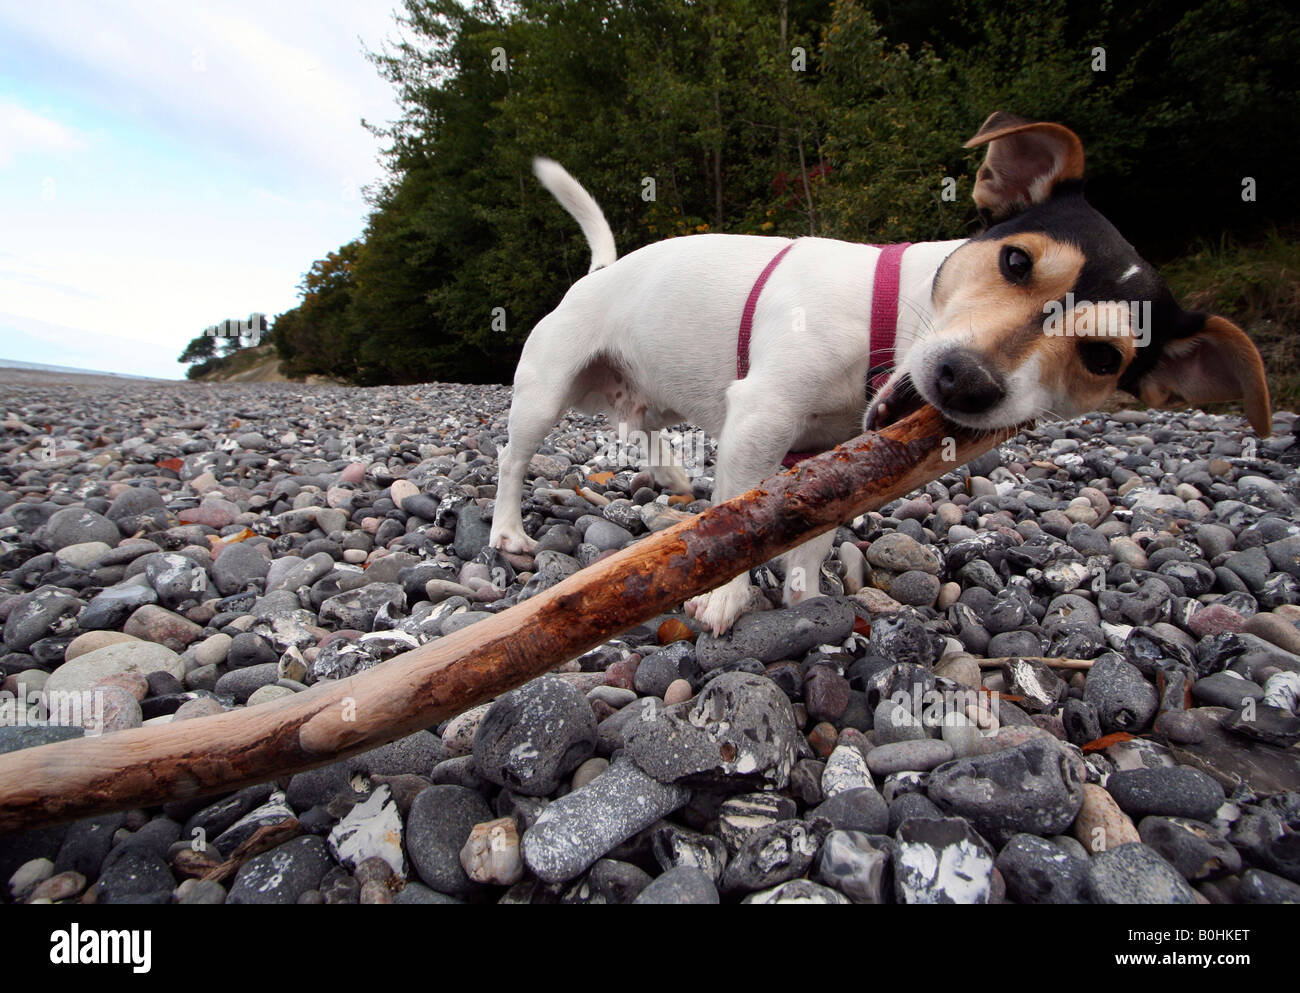 Jack Russell carrying a stick Stock Photo